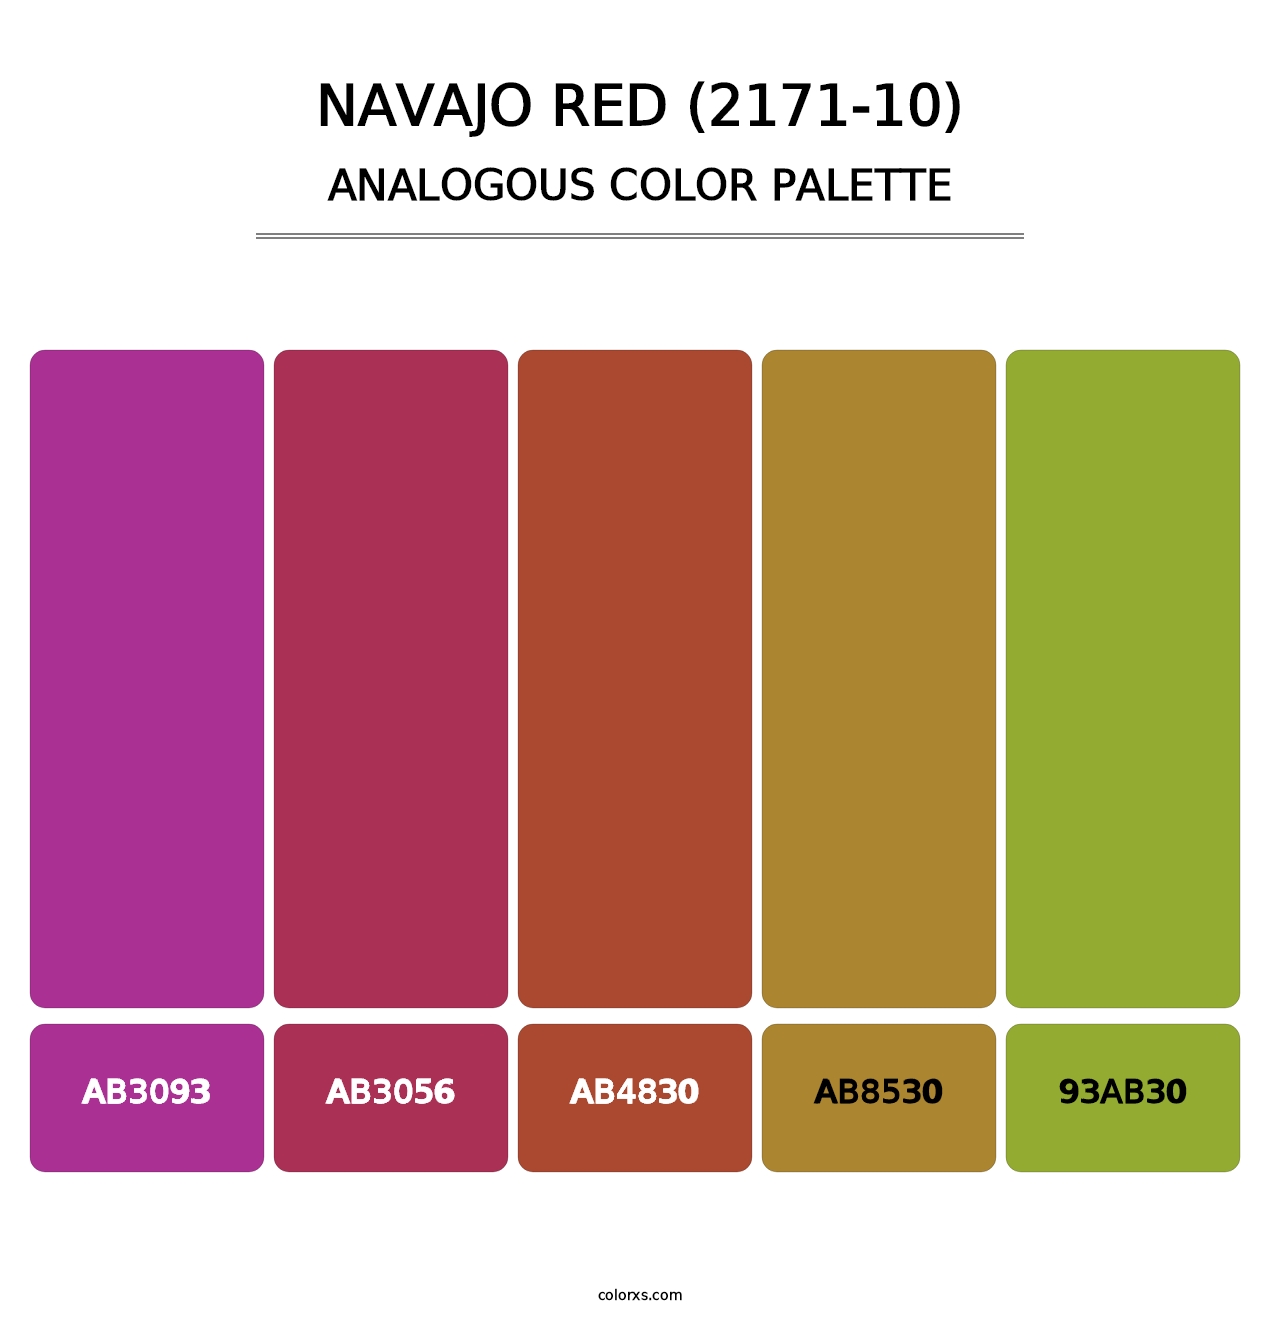 Navajo Red (2171-10) - Analogous Color Palette